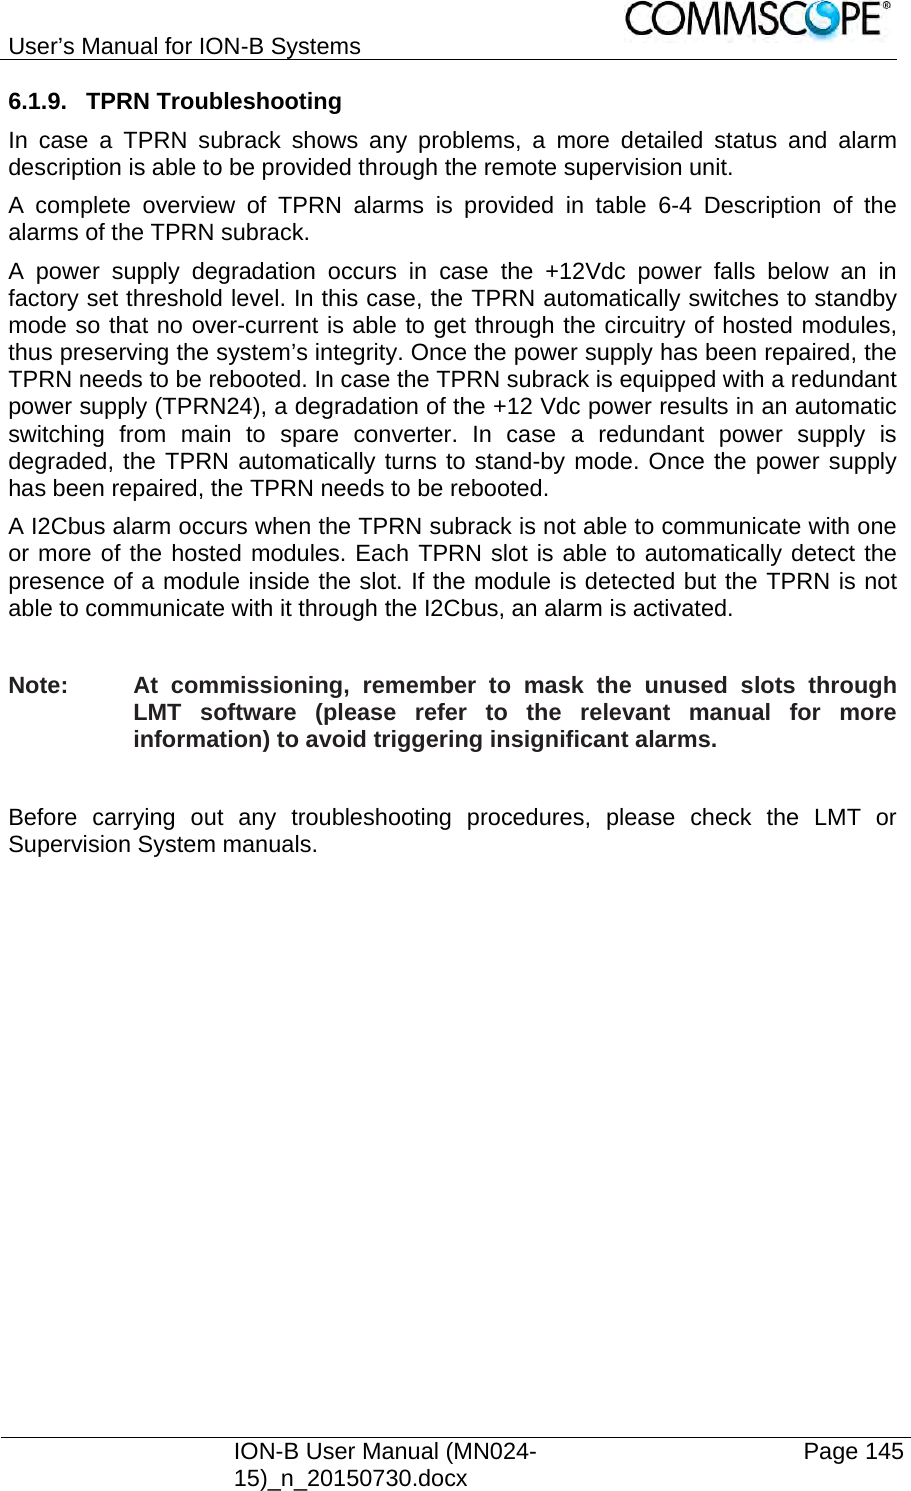 User’s Manual for ION-B Systems    ION-B User Manual (MN024-15)_n_20150730.docx  Page 145 6.1.9. TPRN Troubleshooting In case a TPRN subrack shows any problems, a more detailed status and alarm description is able to be provided through the remote supervision unit. A complete overview of TPRN alarms is provided in table 6-4 Description of the alarms of the TPRN subrack. A power supply degradation occurs in case the +12Vdc power falls below an in factory set threshold level. In this case, the TPRN automatically switches to standby mode so that no over-current is able to get through the circuitry of hosted modules, thus preserving the system’s integrity. Once the power supply has been repaired, the TPRN needs to be rebooted. In case the TPRN subrack is equipped with a redundant power supply (TPRN24), a degradation of the +12 Vdc power results in an automatic switching from main to spare converter. In case a redundant power supply is degraded, the TPRN automatically turns to stand-by mode. Once the power supply has been repaired, the TPRN needs to be rebooted. A I2Cbus alarm occurs when the TPRN subrack is not able to communicate with one or more of the hosted modules. Each TPRN slot is able to automatically detect the presence of a module inside the slot. If the module is detected but the TPRN is not able to communicate with it through the I2Cbus, an alarm is activated.  Note:  At commissioning, remember to mask the unused slots through LMT software (please refer to the relevant manual for more information) to avoid triggering insignificant alarms.  Before carrying out any troubleshooting procedures, please check the LMT or Supervision System manuals.  